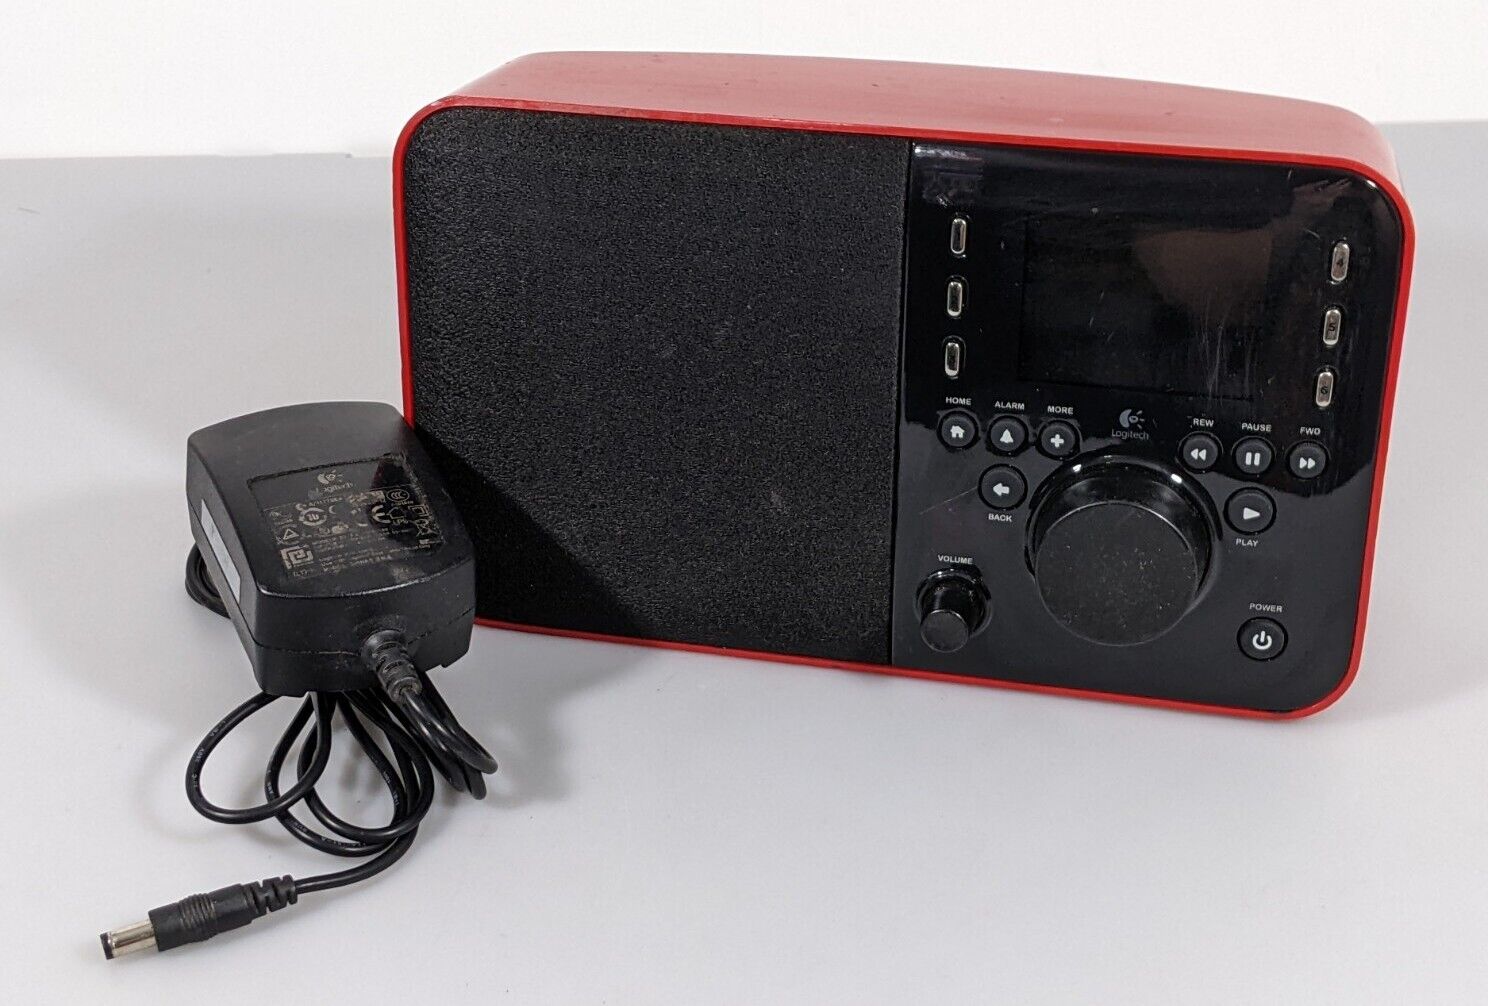 Logitech Squeezebox Radio RED AC Adapter 830-000080 TESTED power supply charger Brand: Logitech Type: Internet Radio